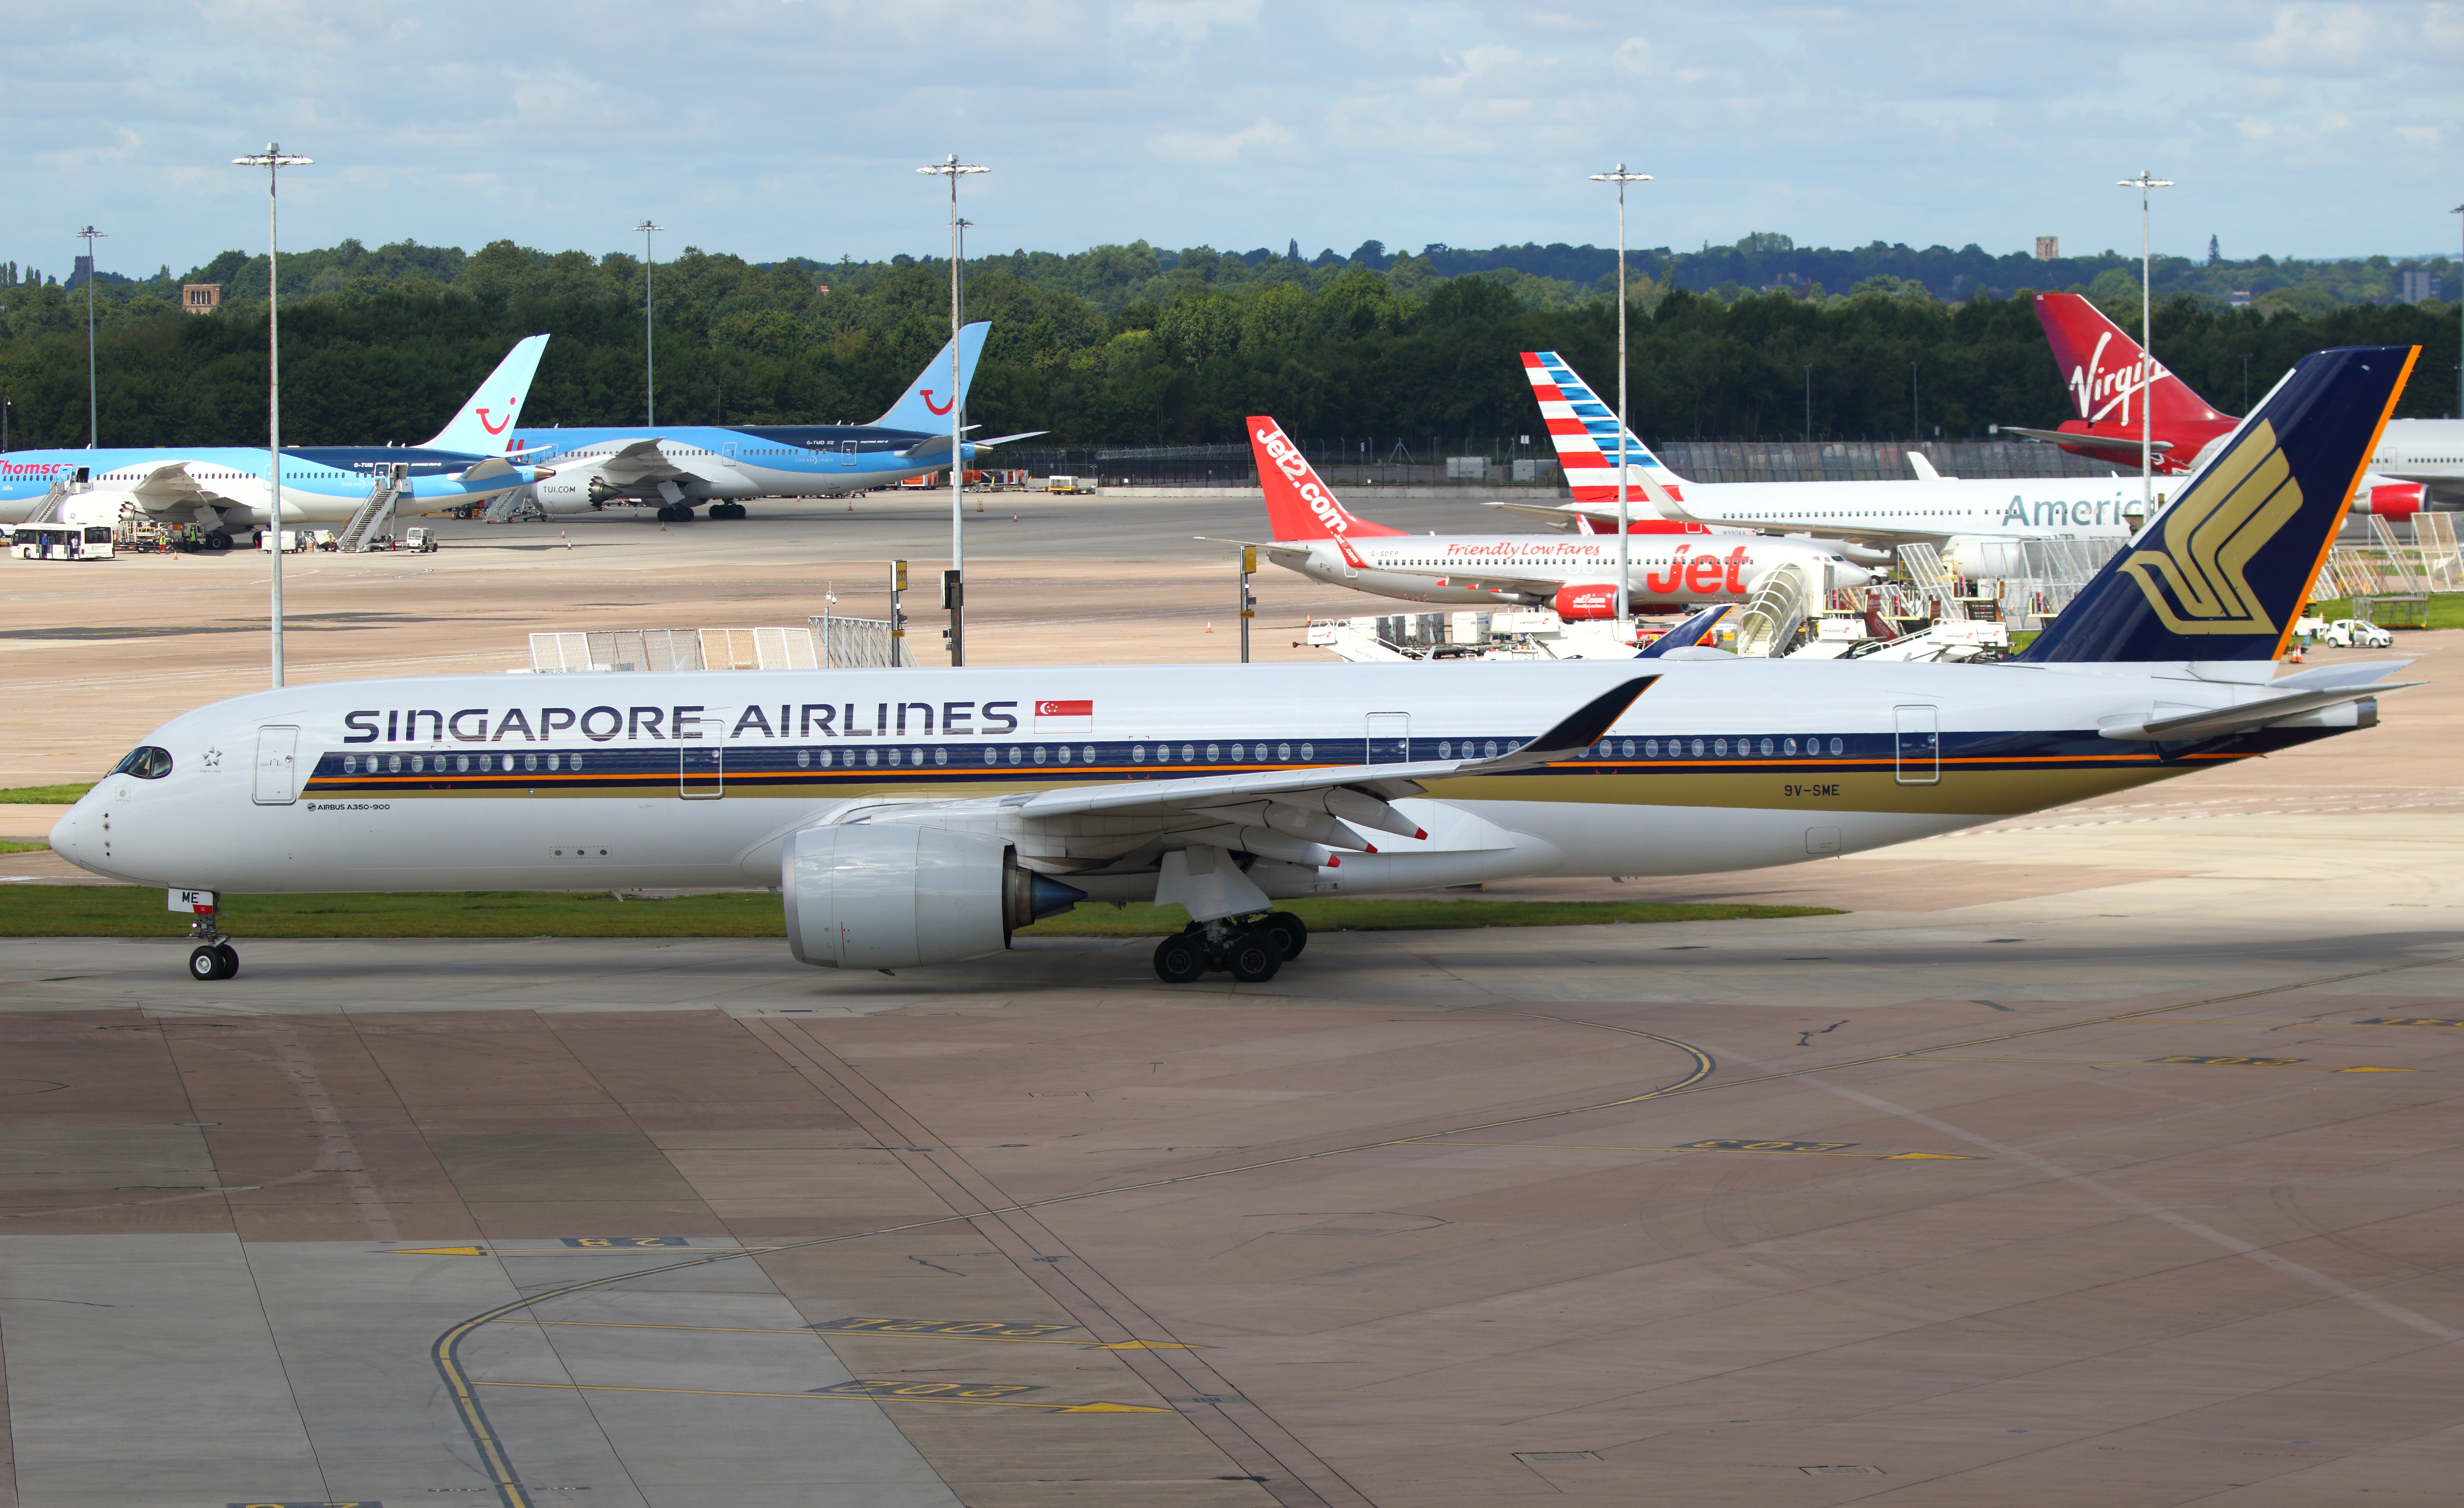 Singapore Airlines - Simple English Wikipedia, the free encyclopedia